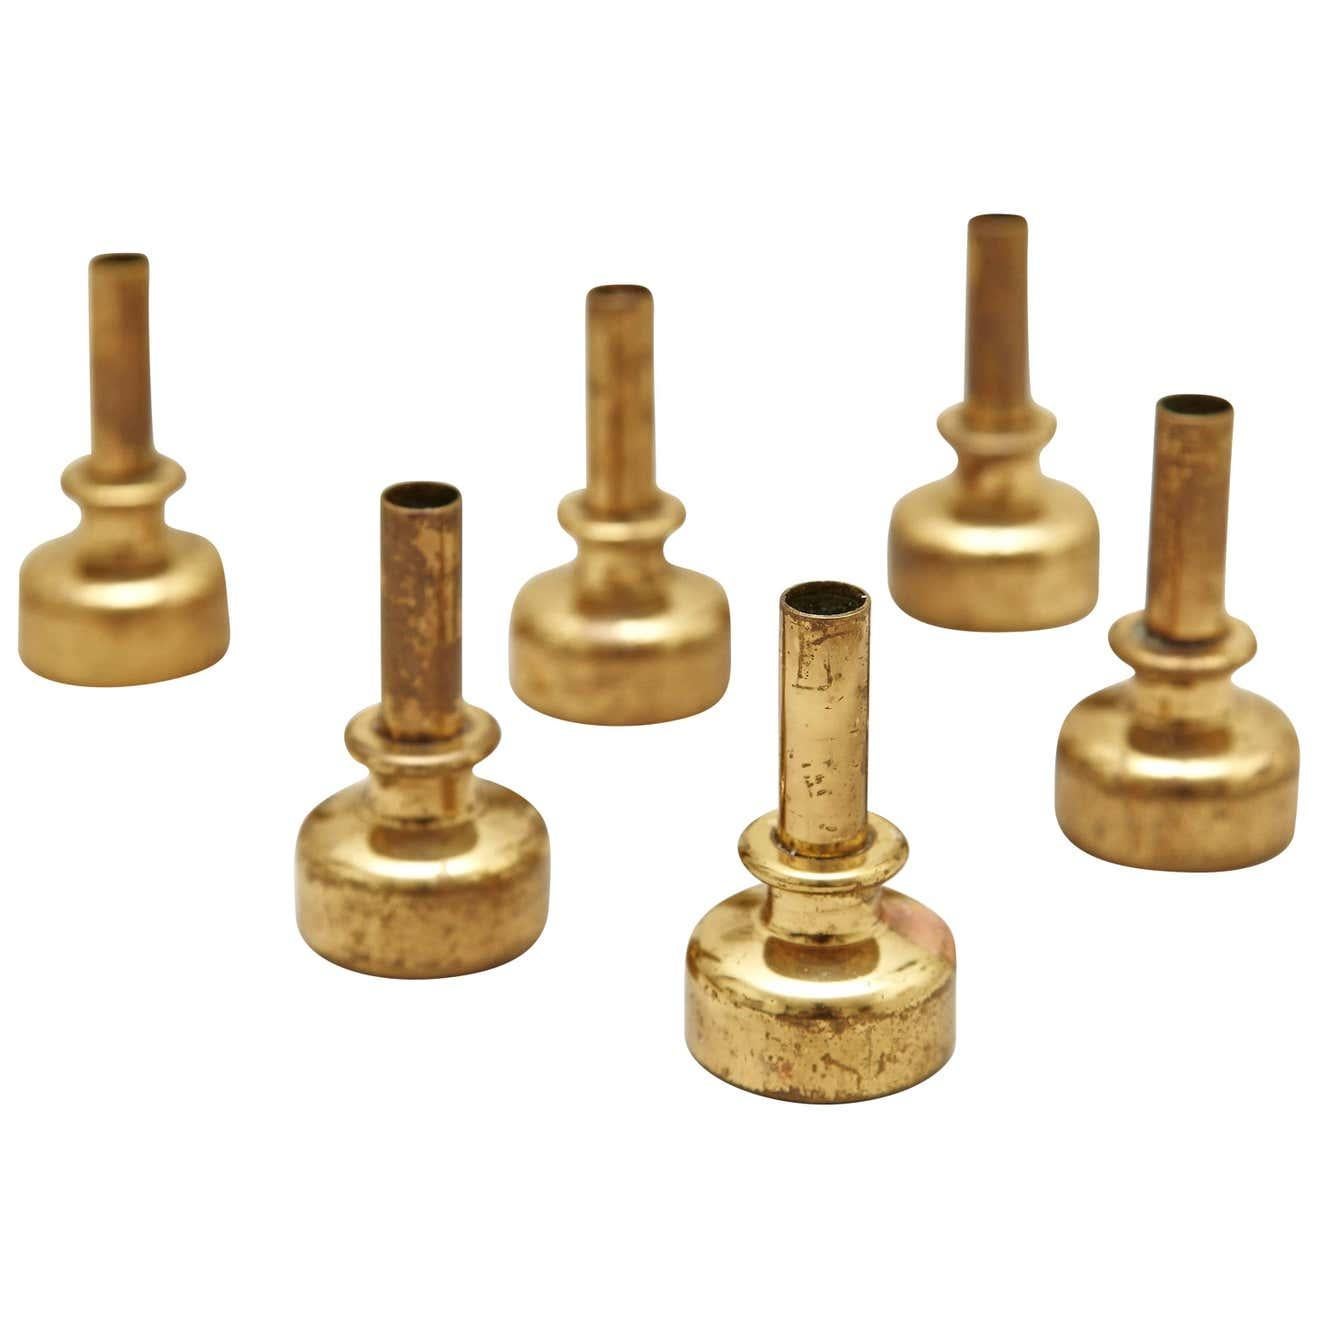 Brass candleholder set designed and manufactured by Hans-Agne Jakobsson in Sweden, circa 1960.

Hans-Agne Jakobsson (1919-2009) Swedish interior decorator and furniture designer Hans-Agne Jakobsson was born in Hvadhem/Gotland in 1919. After